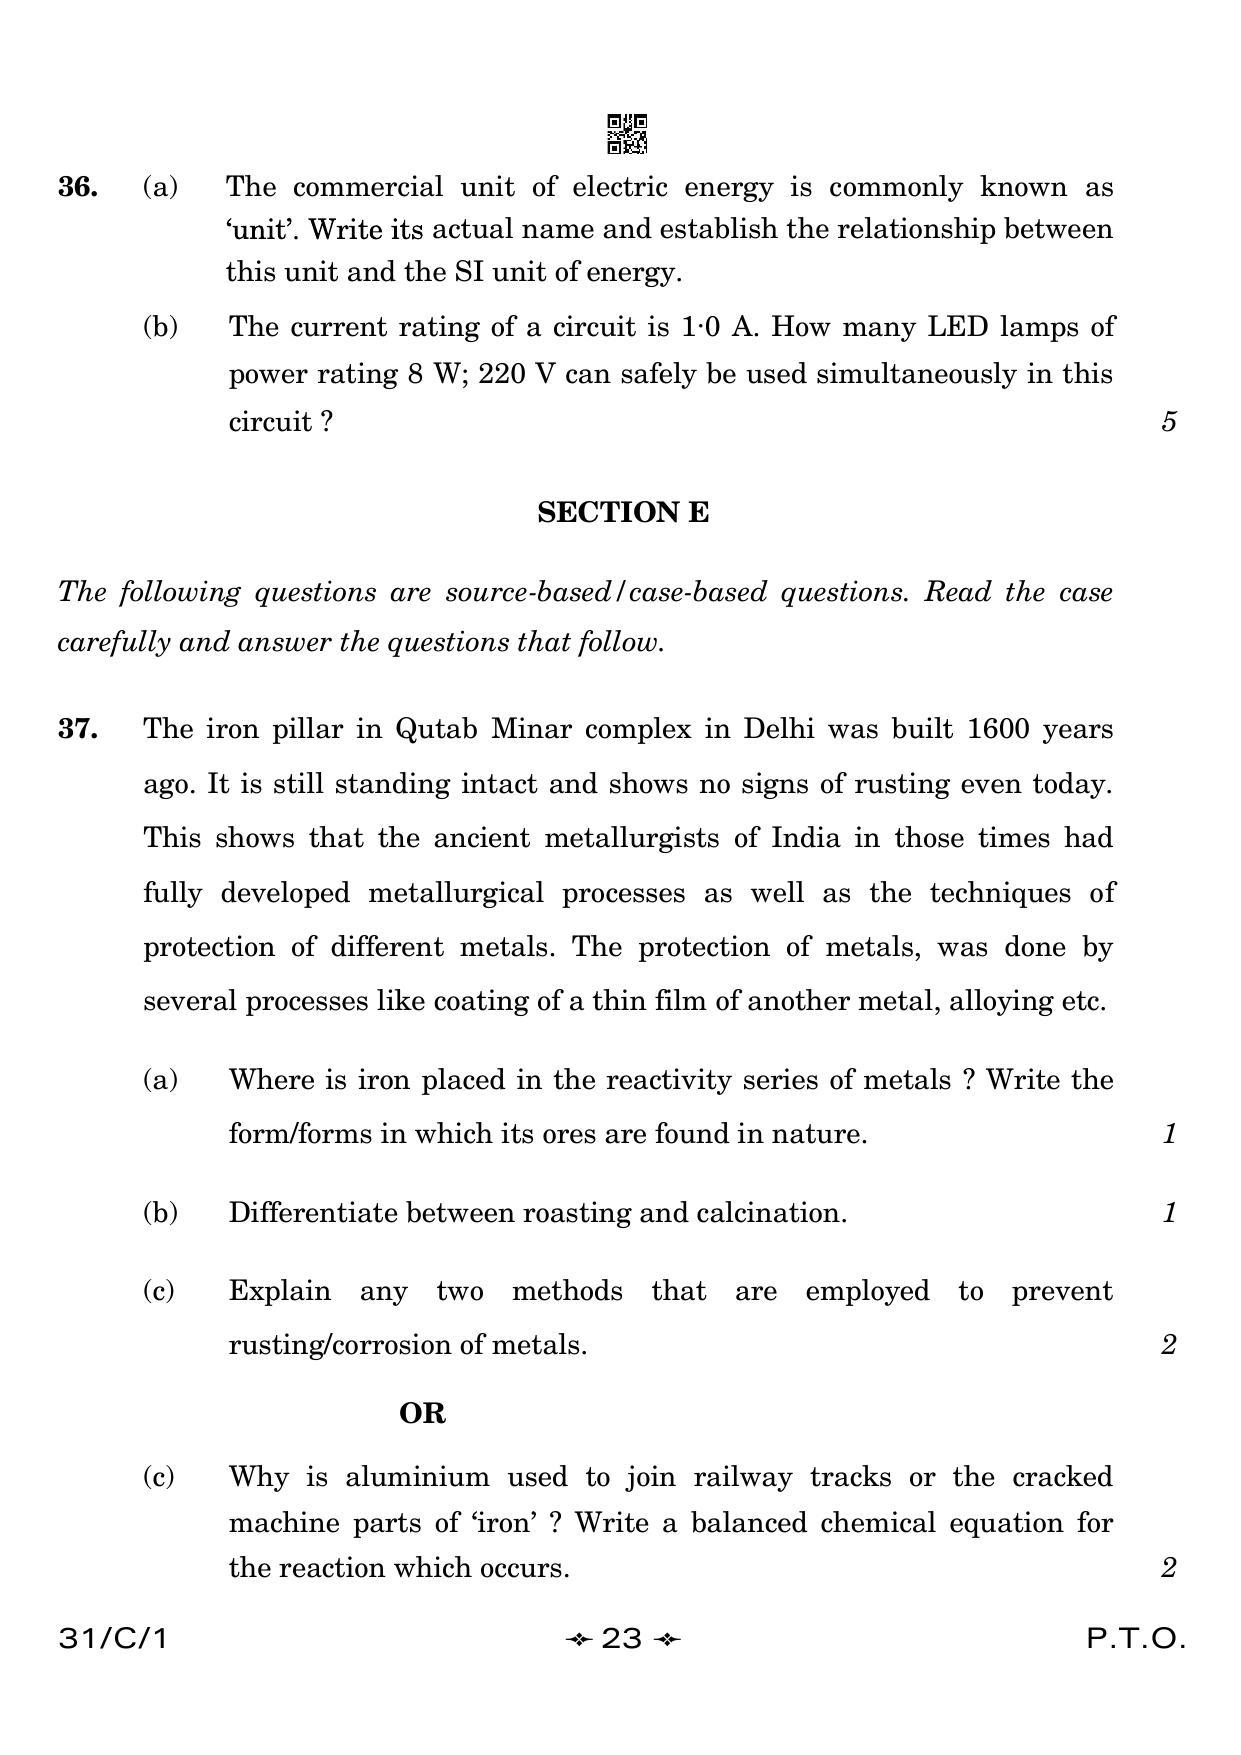 CBSE Class 10 31-1 Science 2023 (Compartment) Question Paper - Page 23